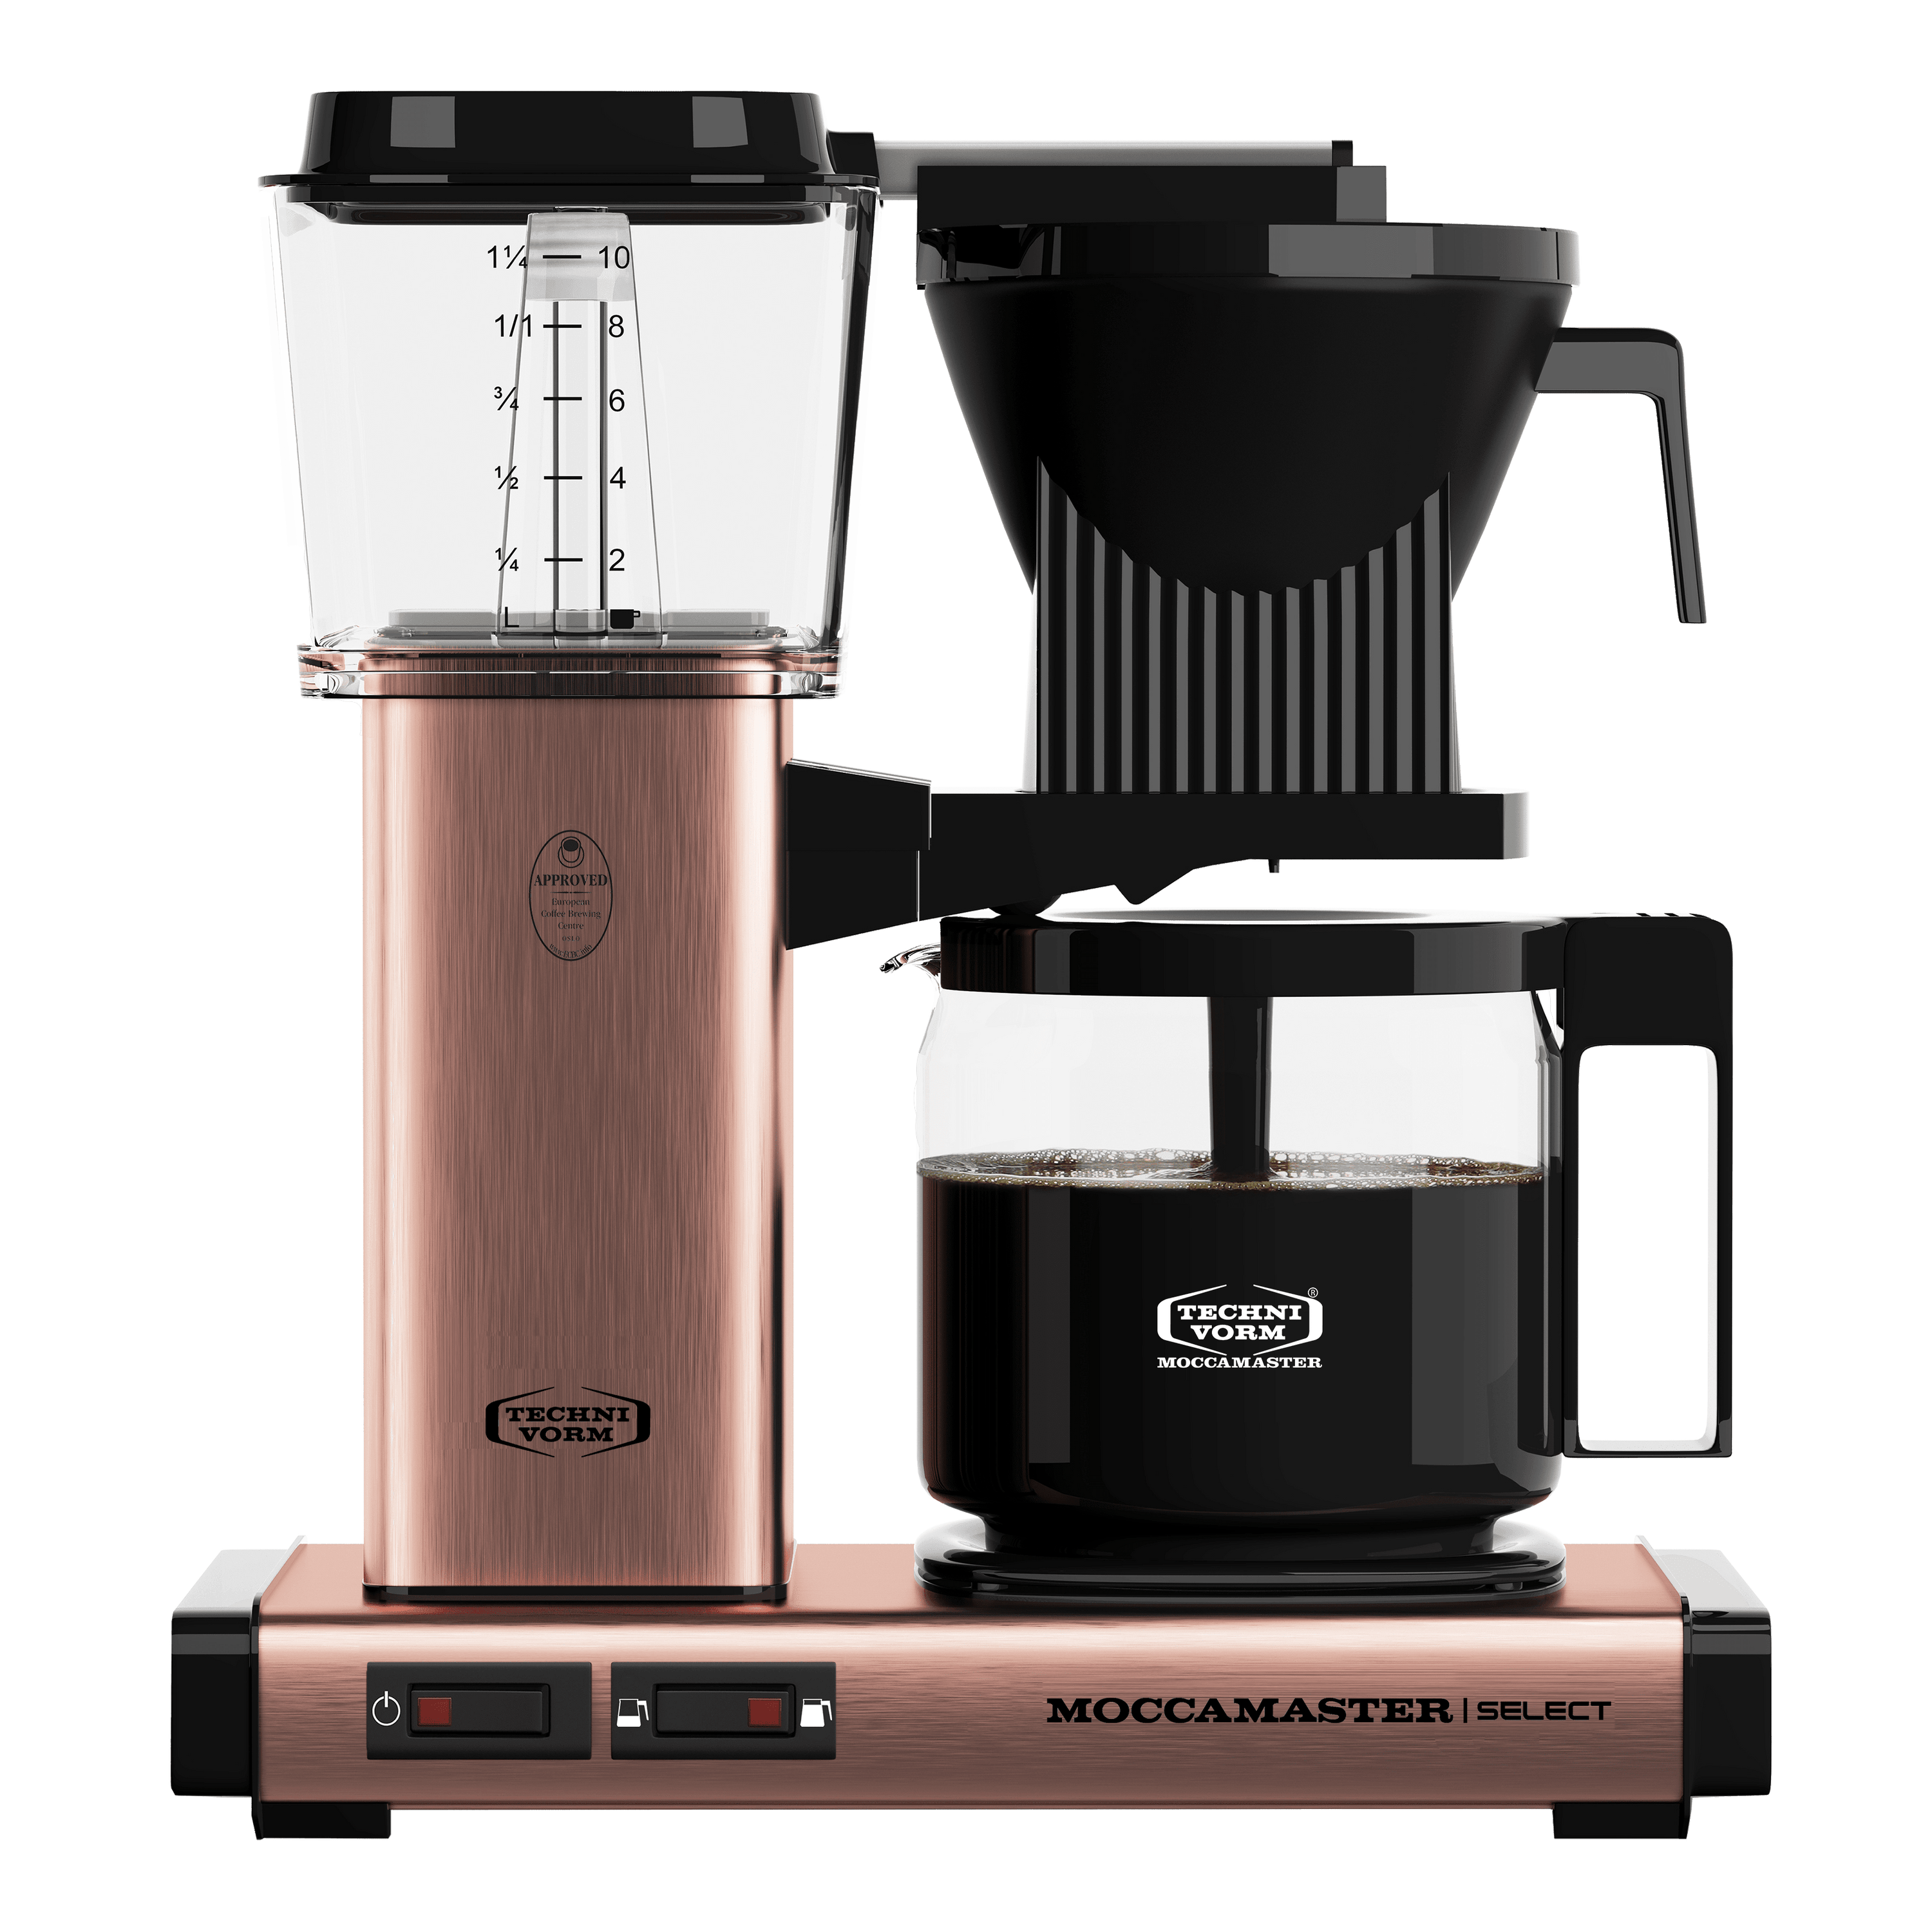 rose gold, copper moccamaster kbg select coffee machine